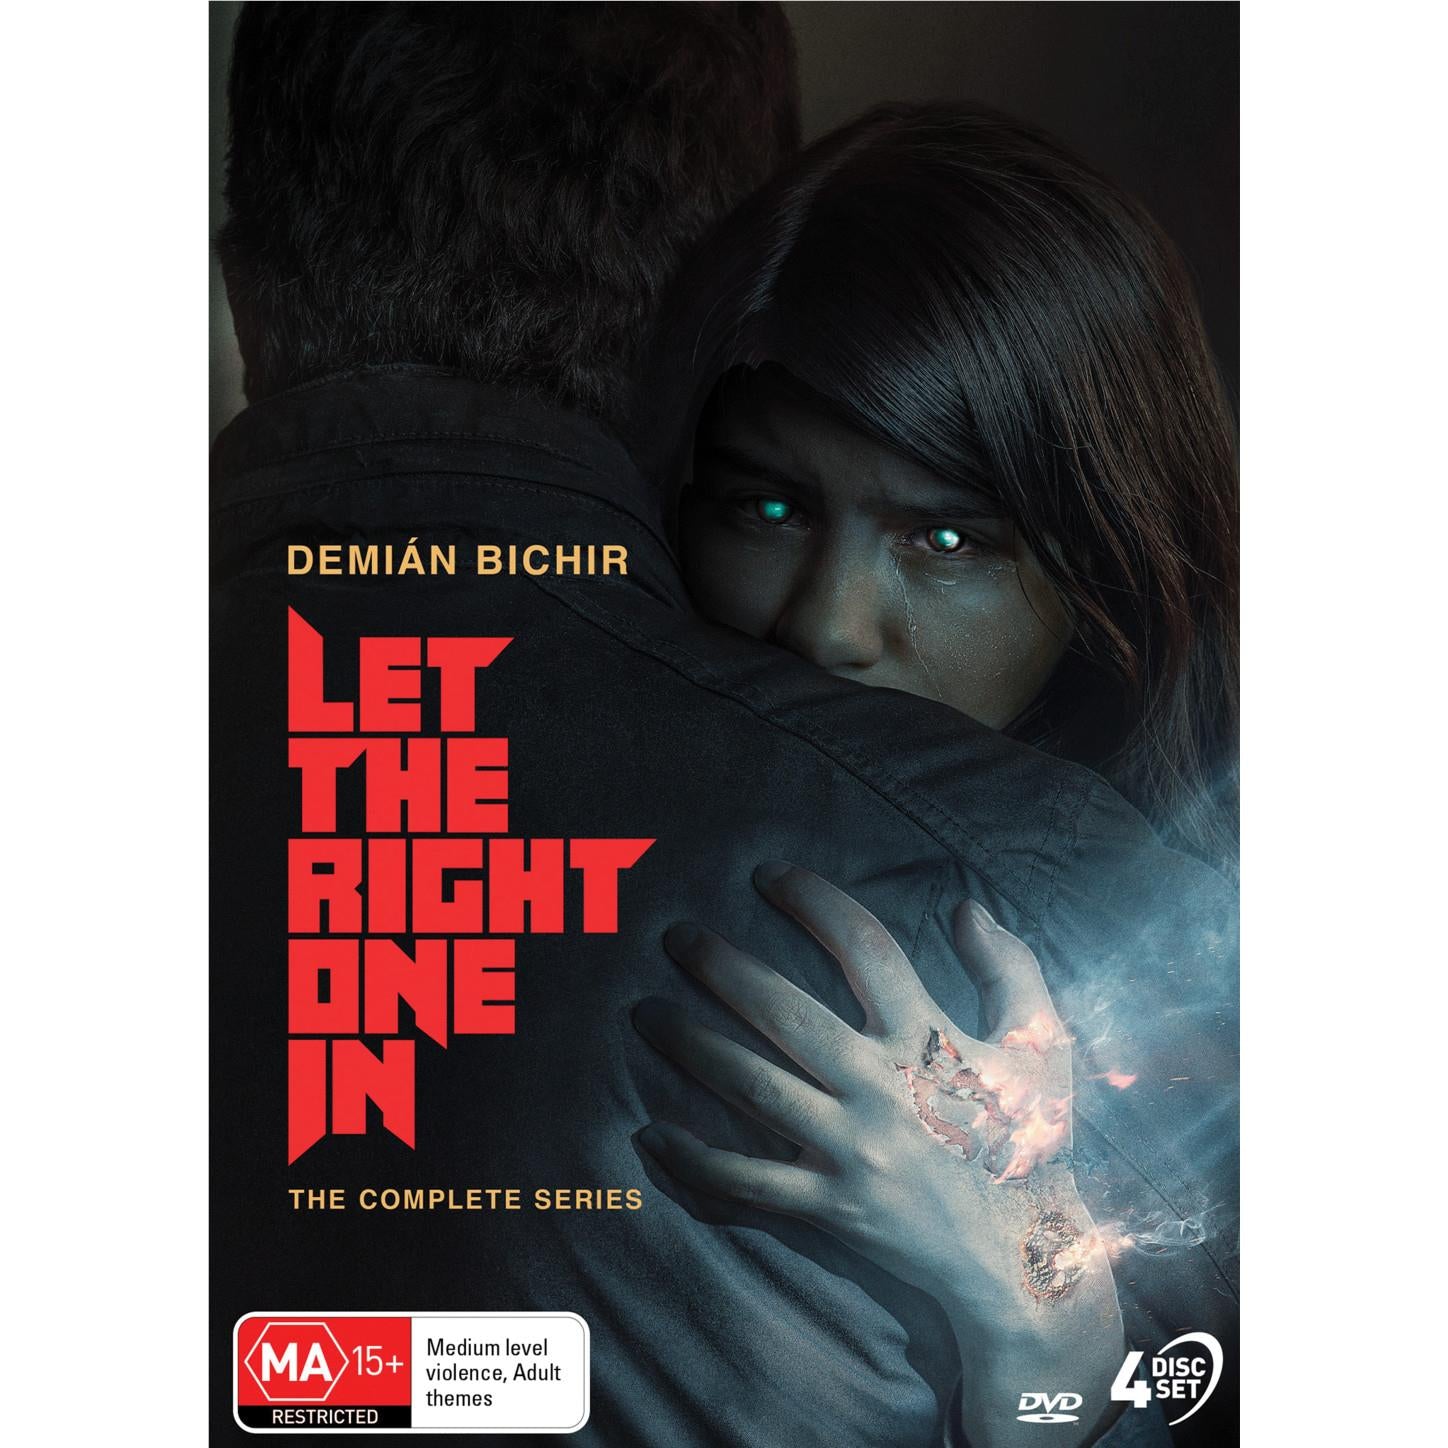 let the right one in - series 1